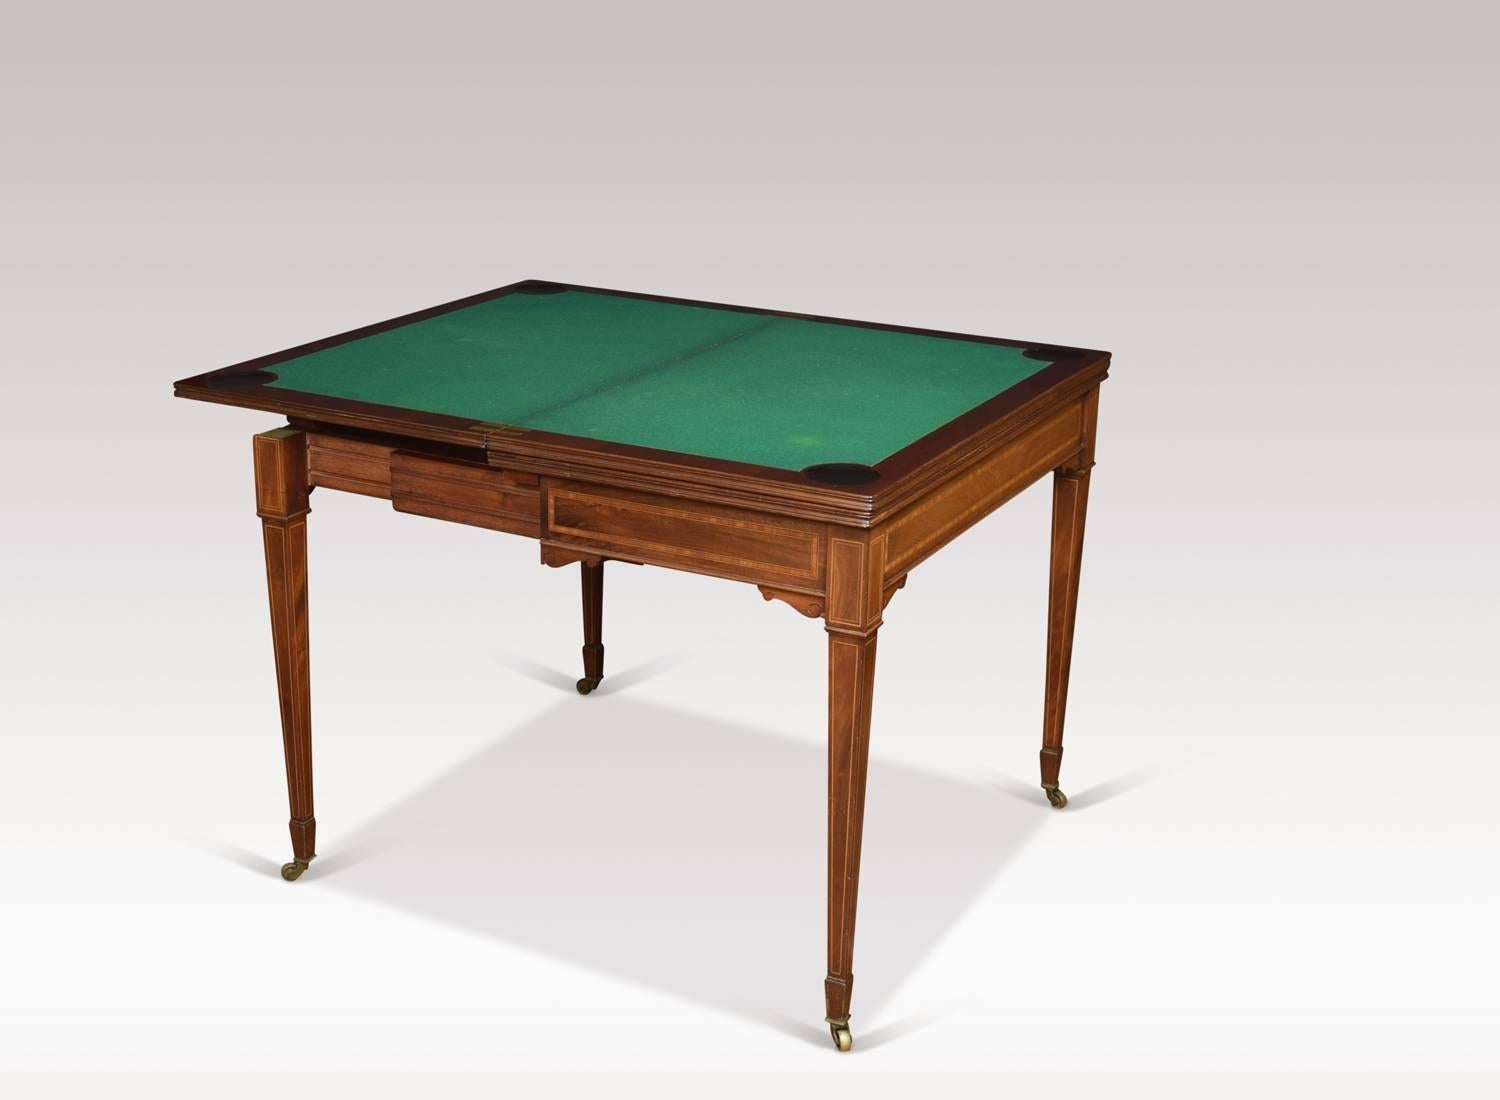 20th Century Edwardian Mahogany Inlaid Roulette Games Table